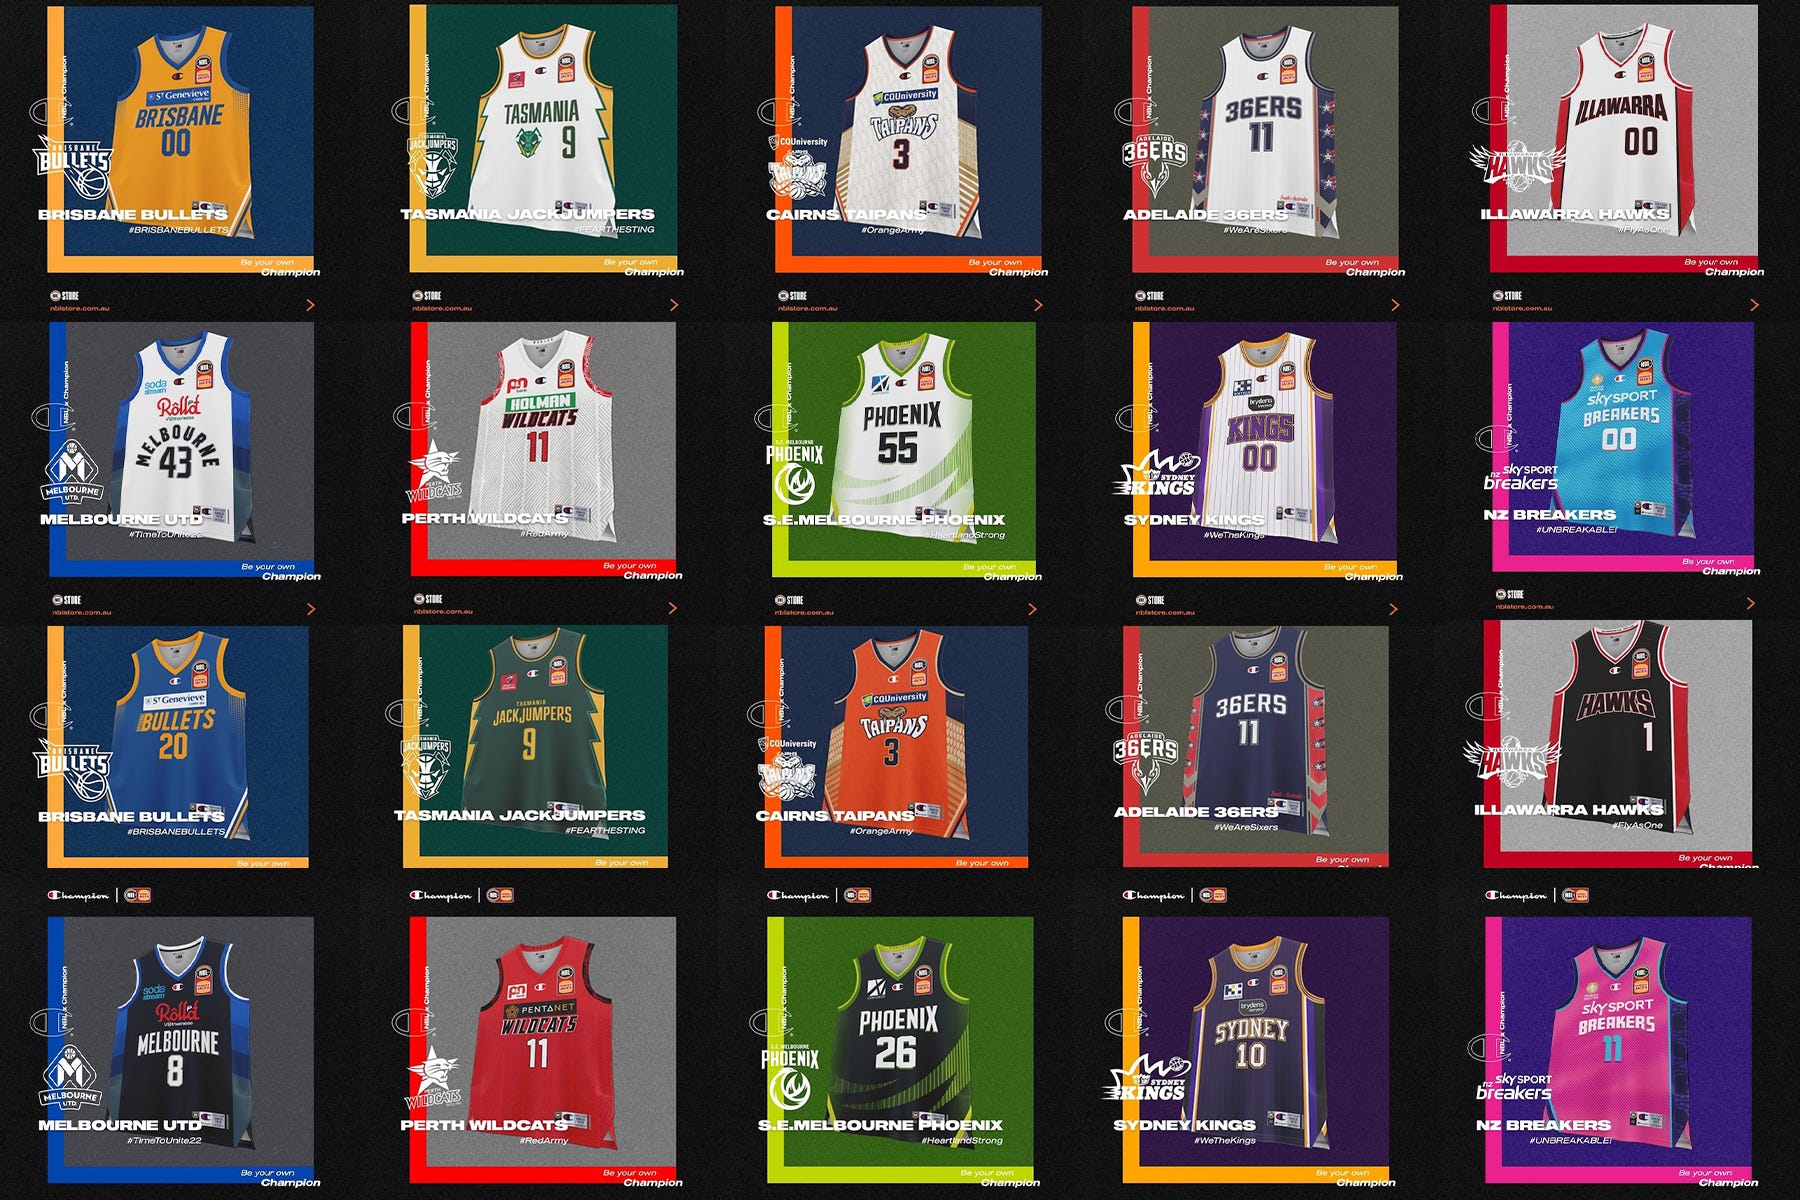 NBL 2021/22 Champion Home/Away Jerseys have dropped. Thoughts